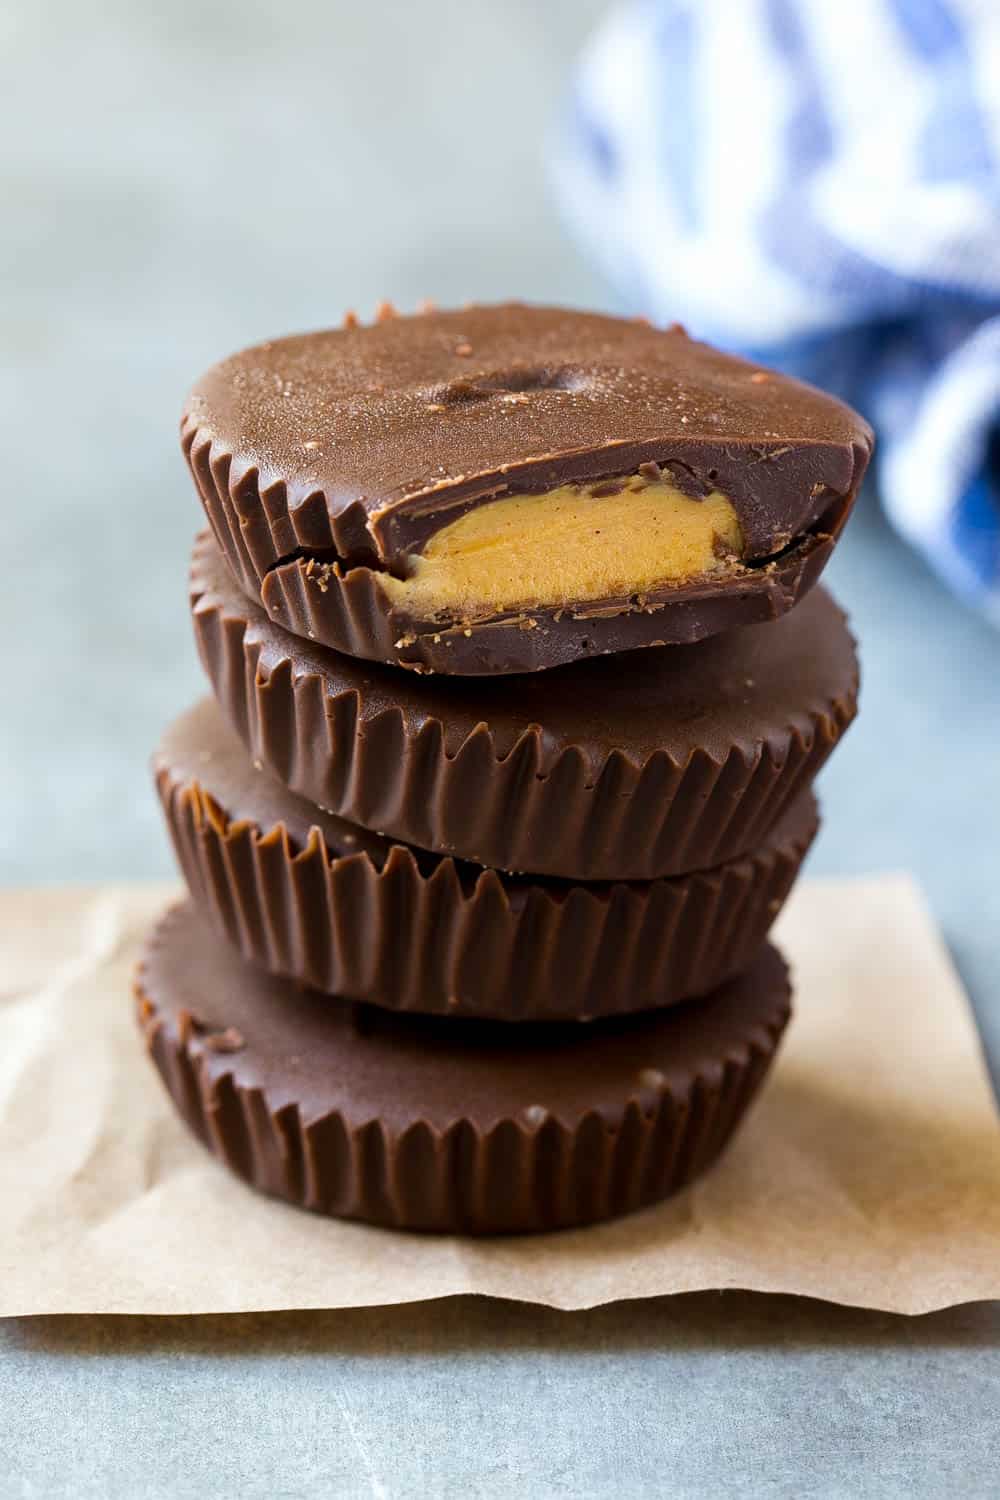 copy cat Reese's candy stacks